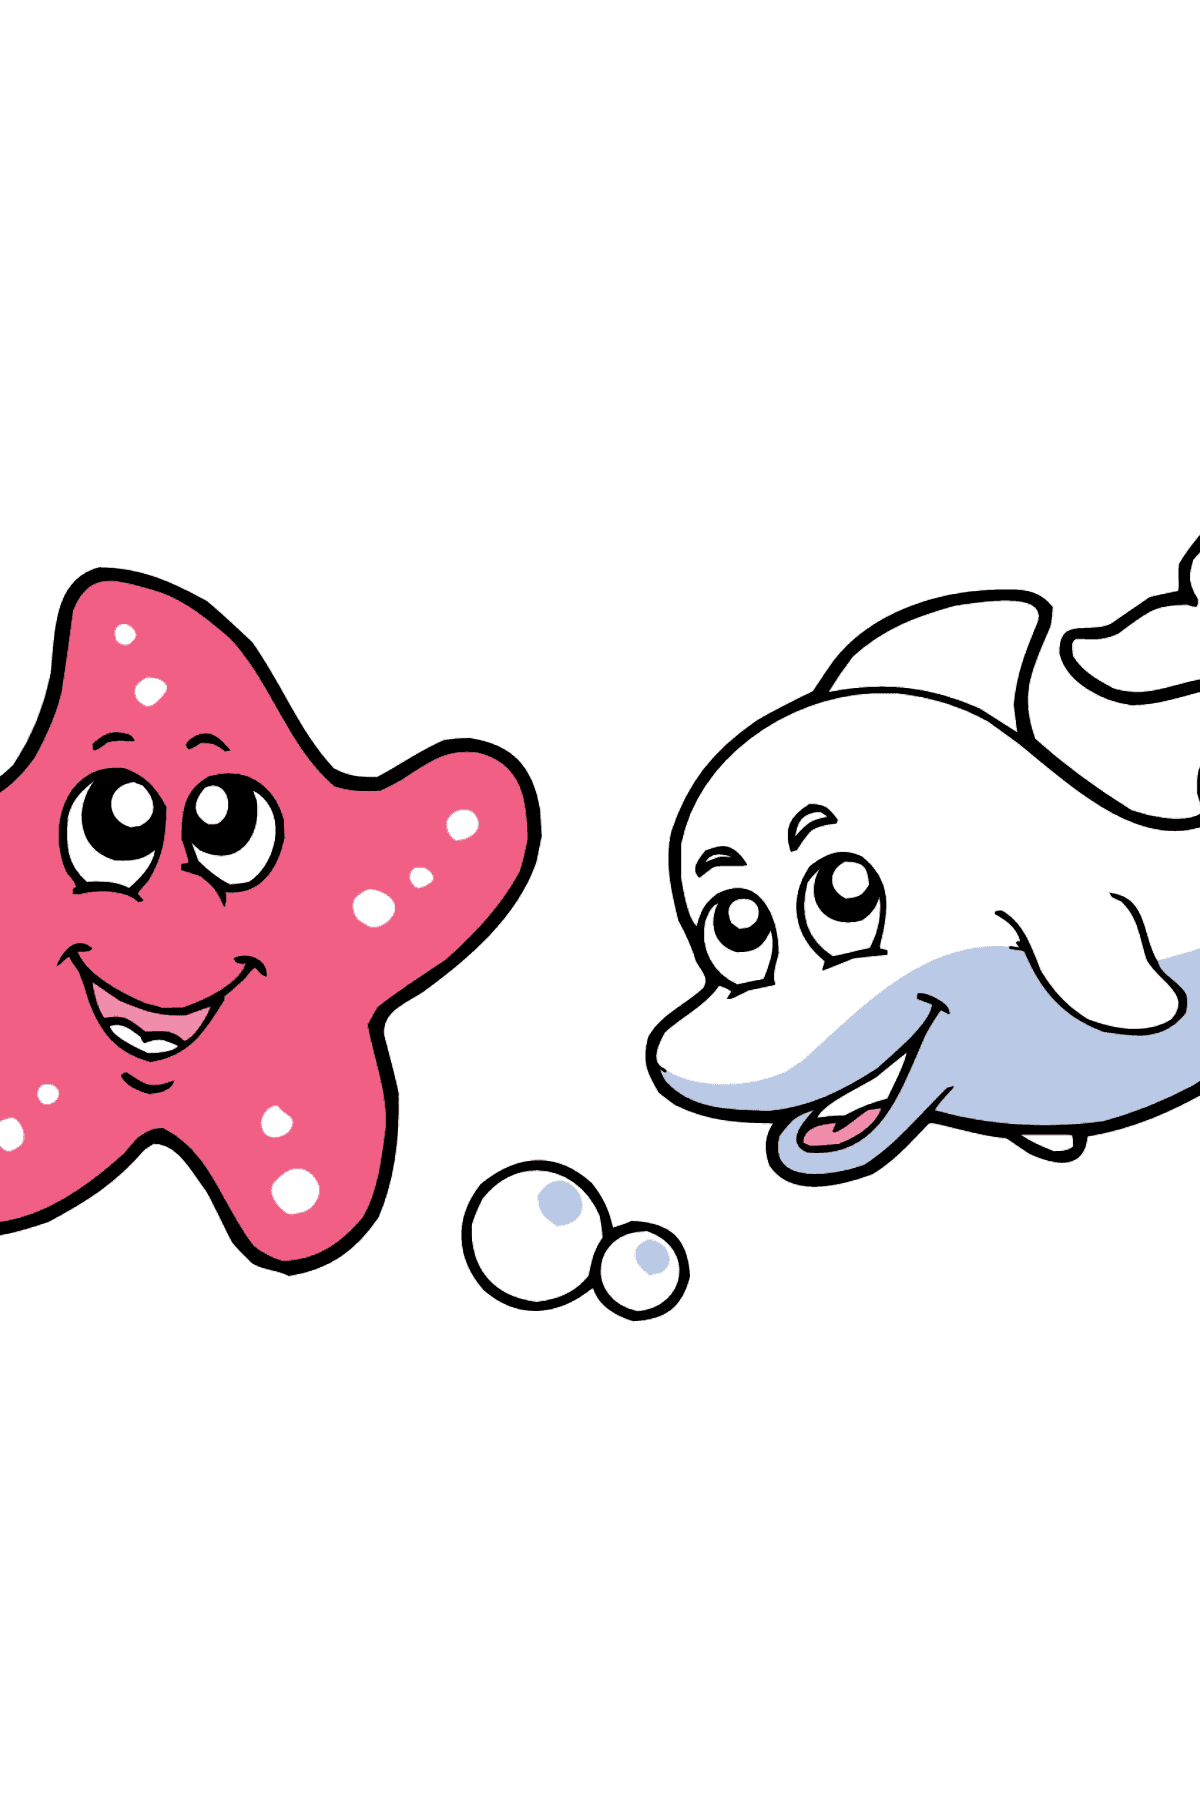 Dolphin and Starfish Coloring page - Coloring Pages for Kids